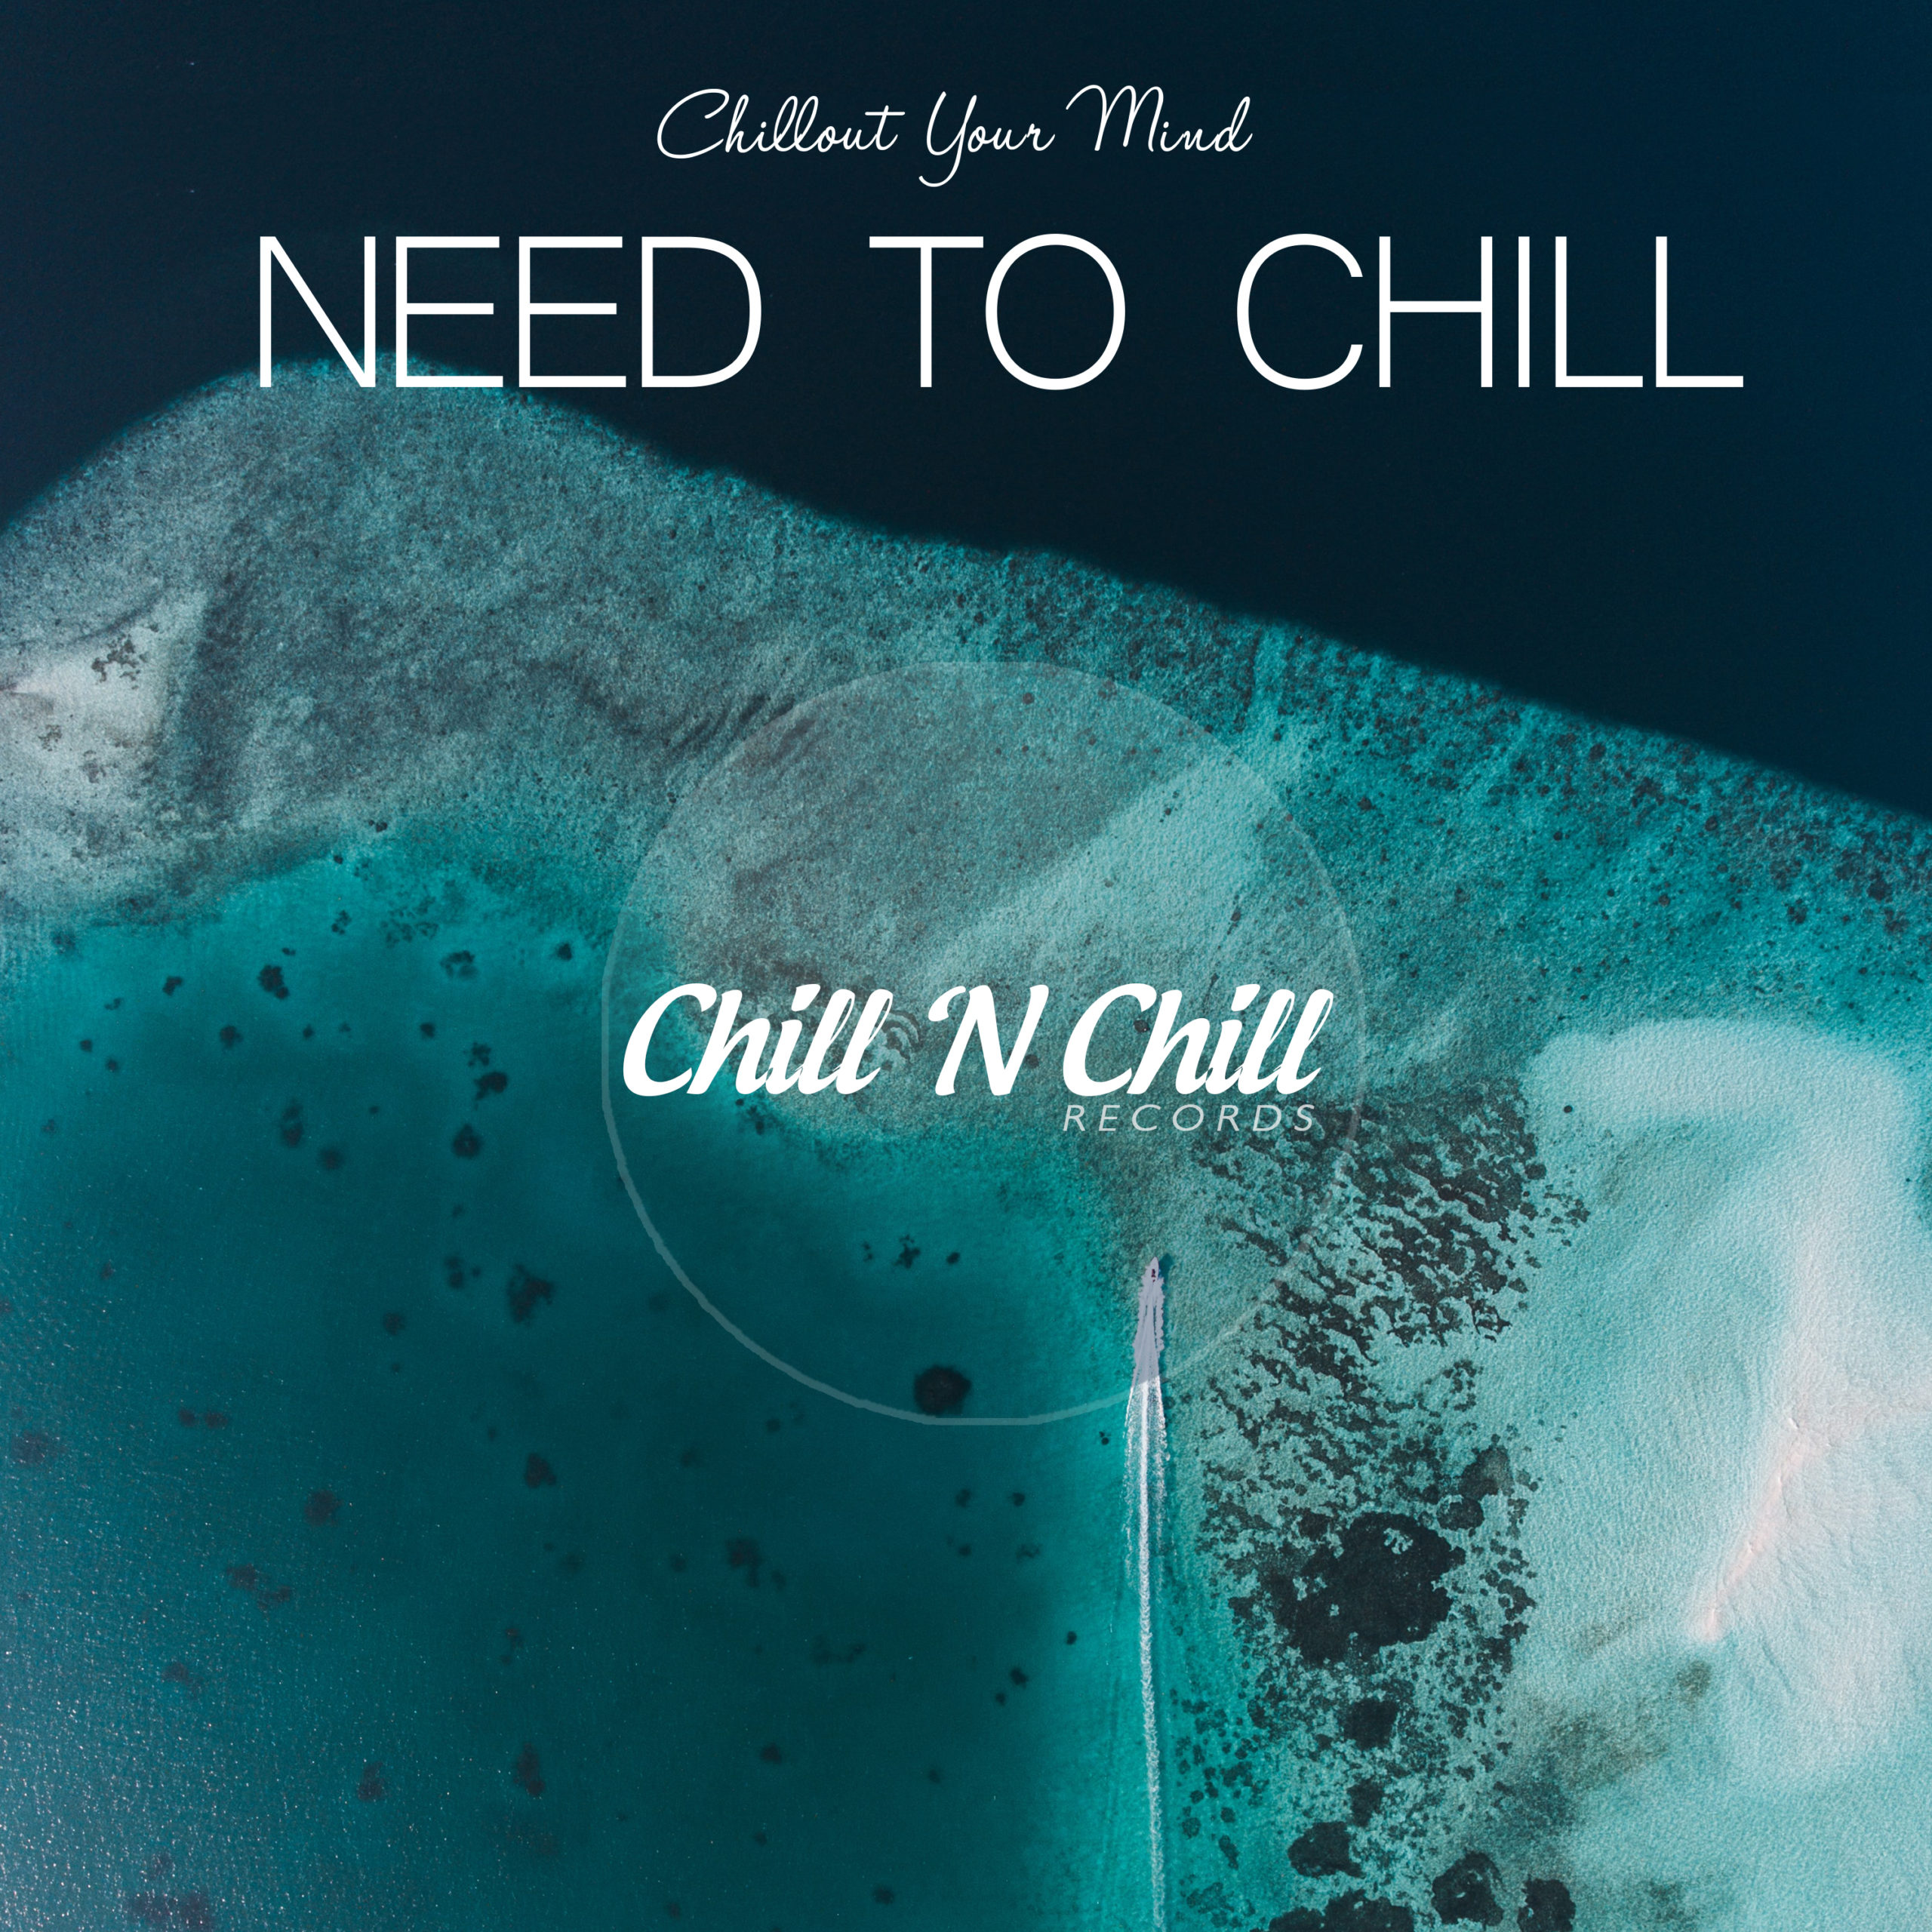 Chill n